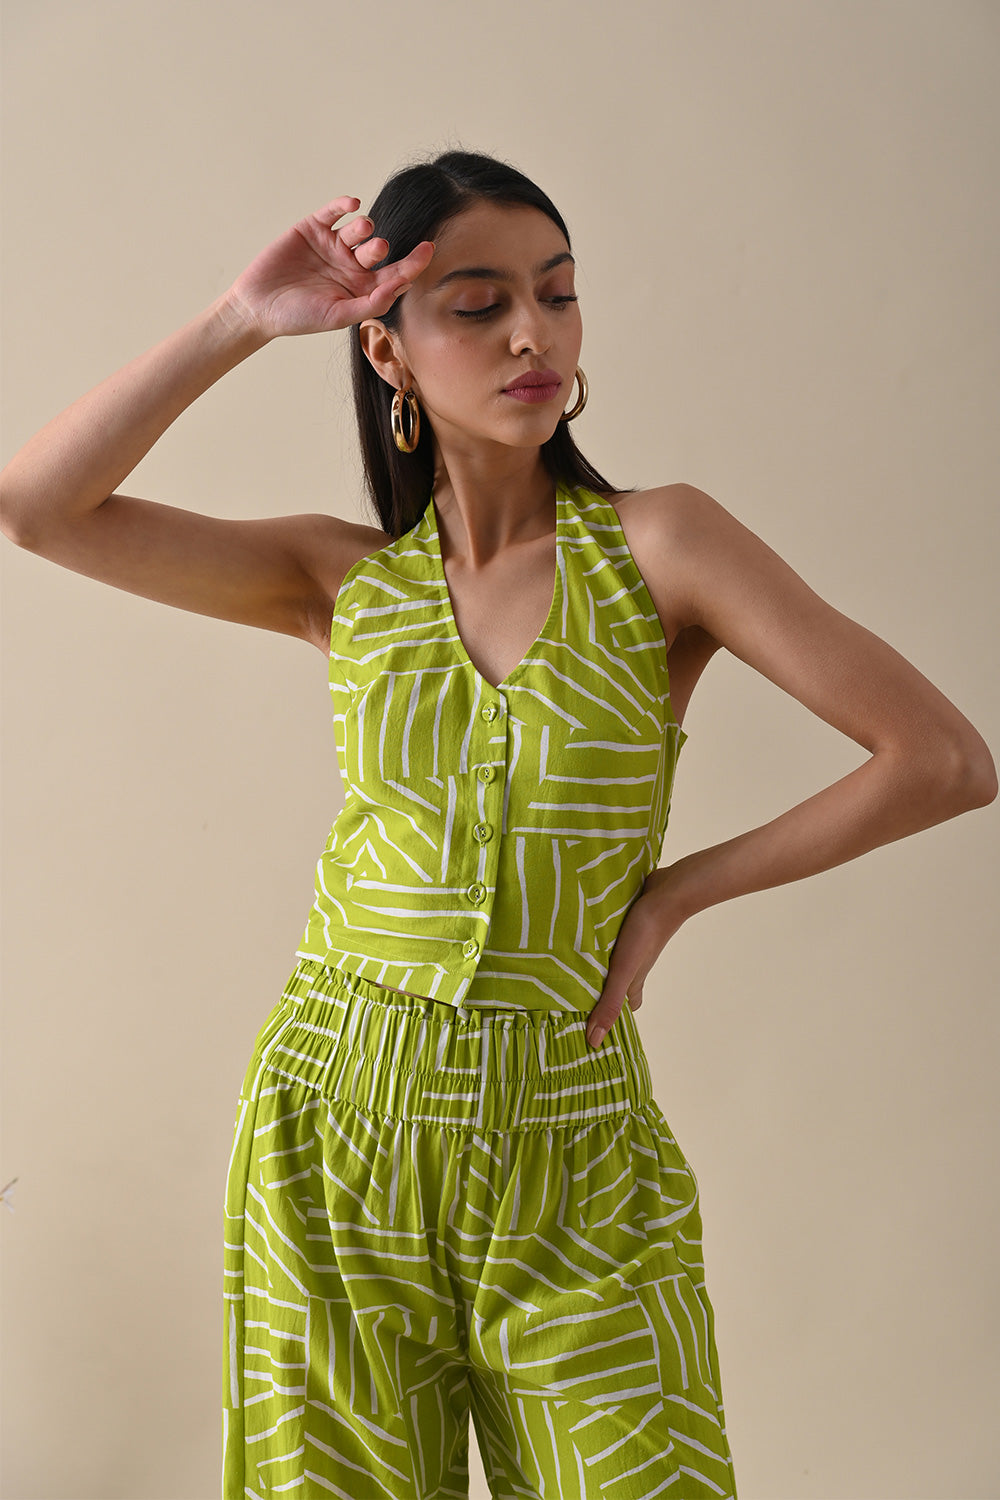 Olive Halter Neck Top at Kamakhyaa by Kanelle. This item is 100% Cotton, Best Selling, Casual Wear, Halter Neck Tops, July Sale, Life in Colours, Natural, Natural with azo dyes, Olive Green, Printed Selfsame, Prints, Regular Fit, Womenswear